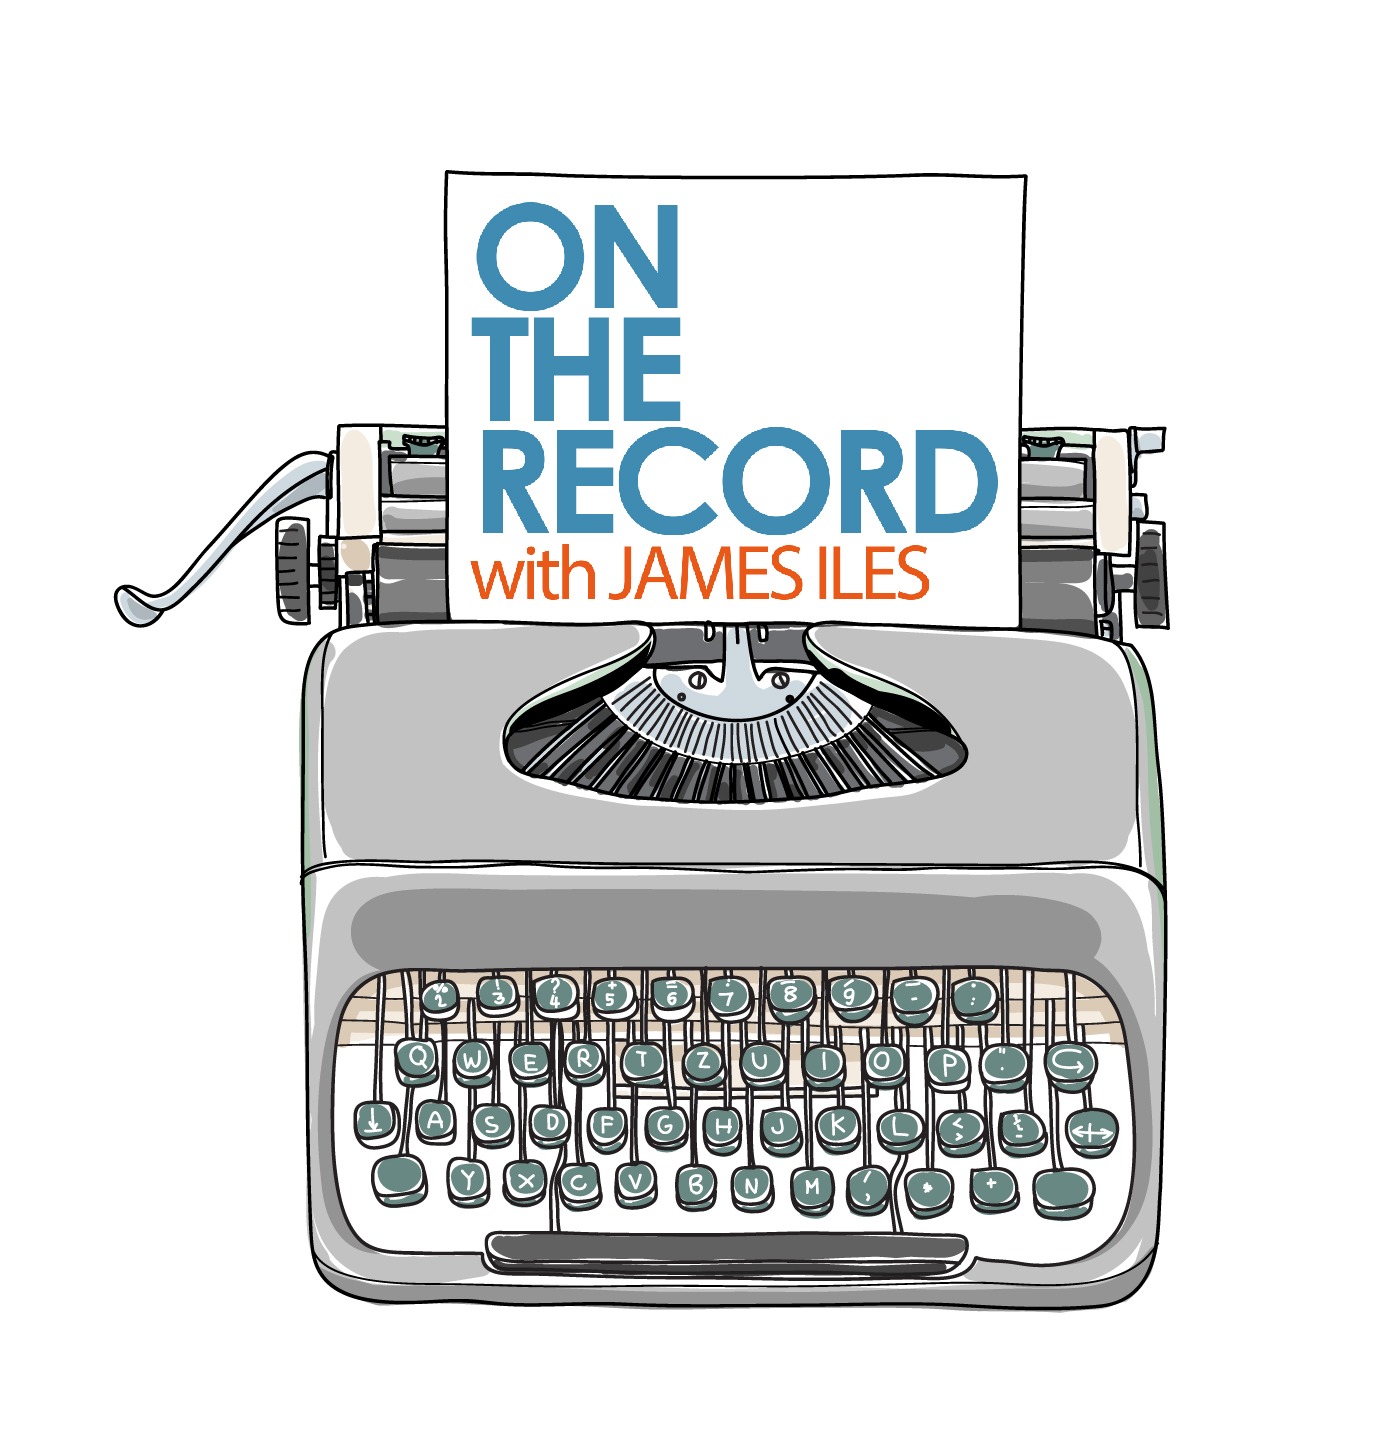 On The Record – A Serial Entrepreneur Using Multiple Premium Domains